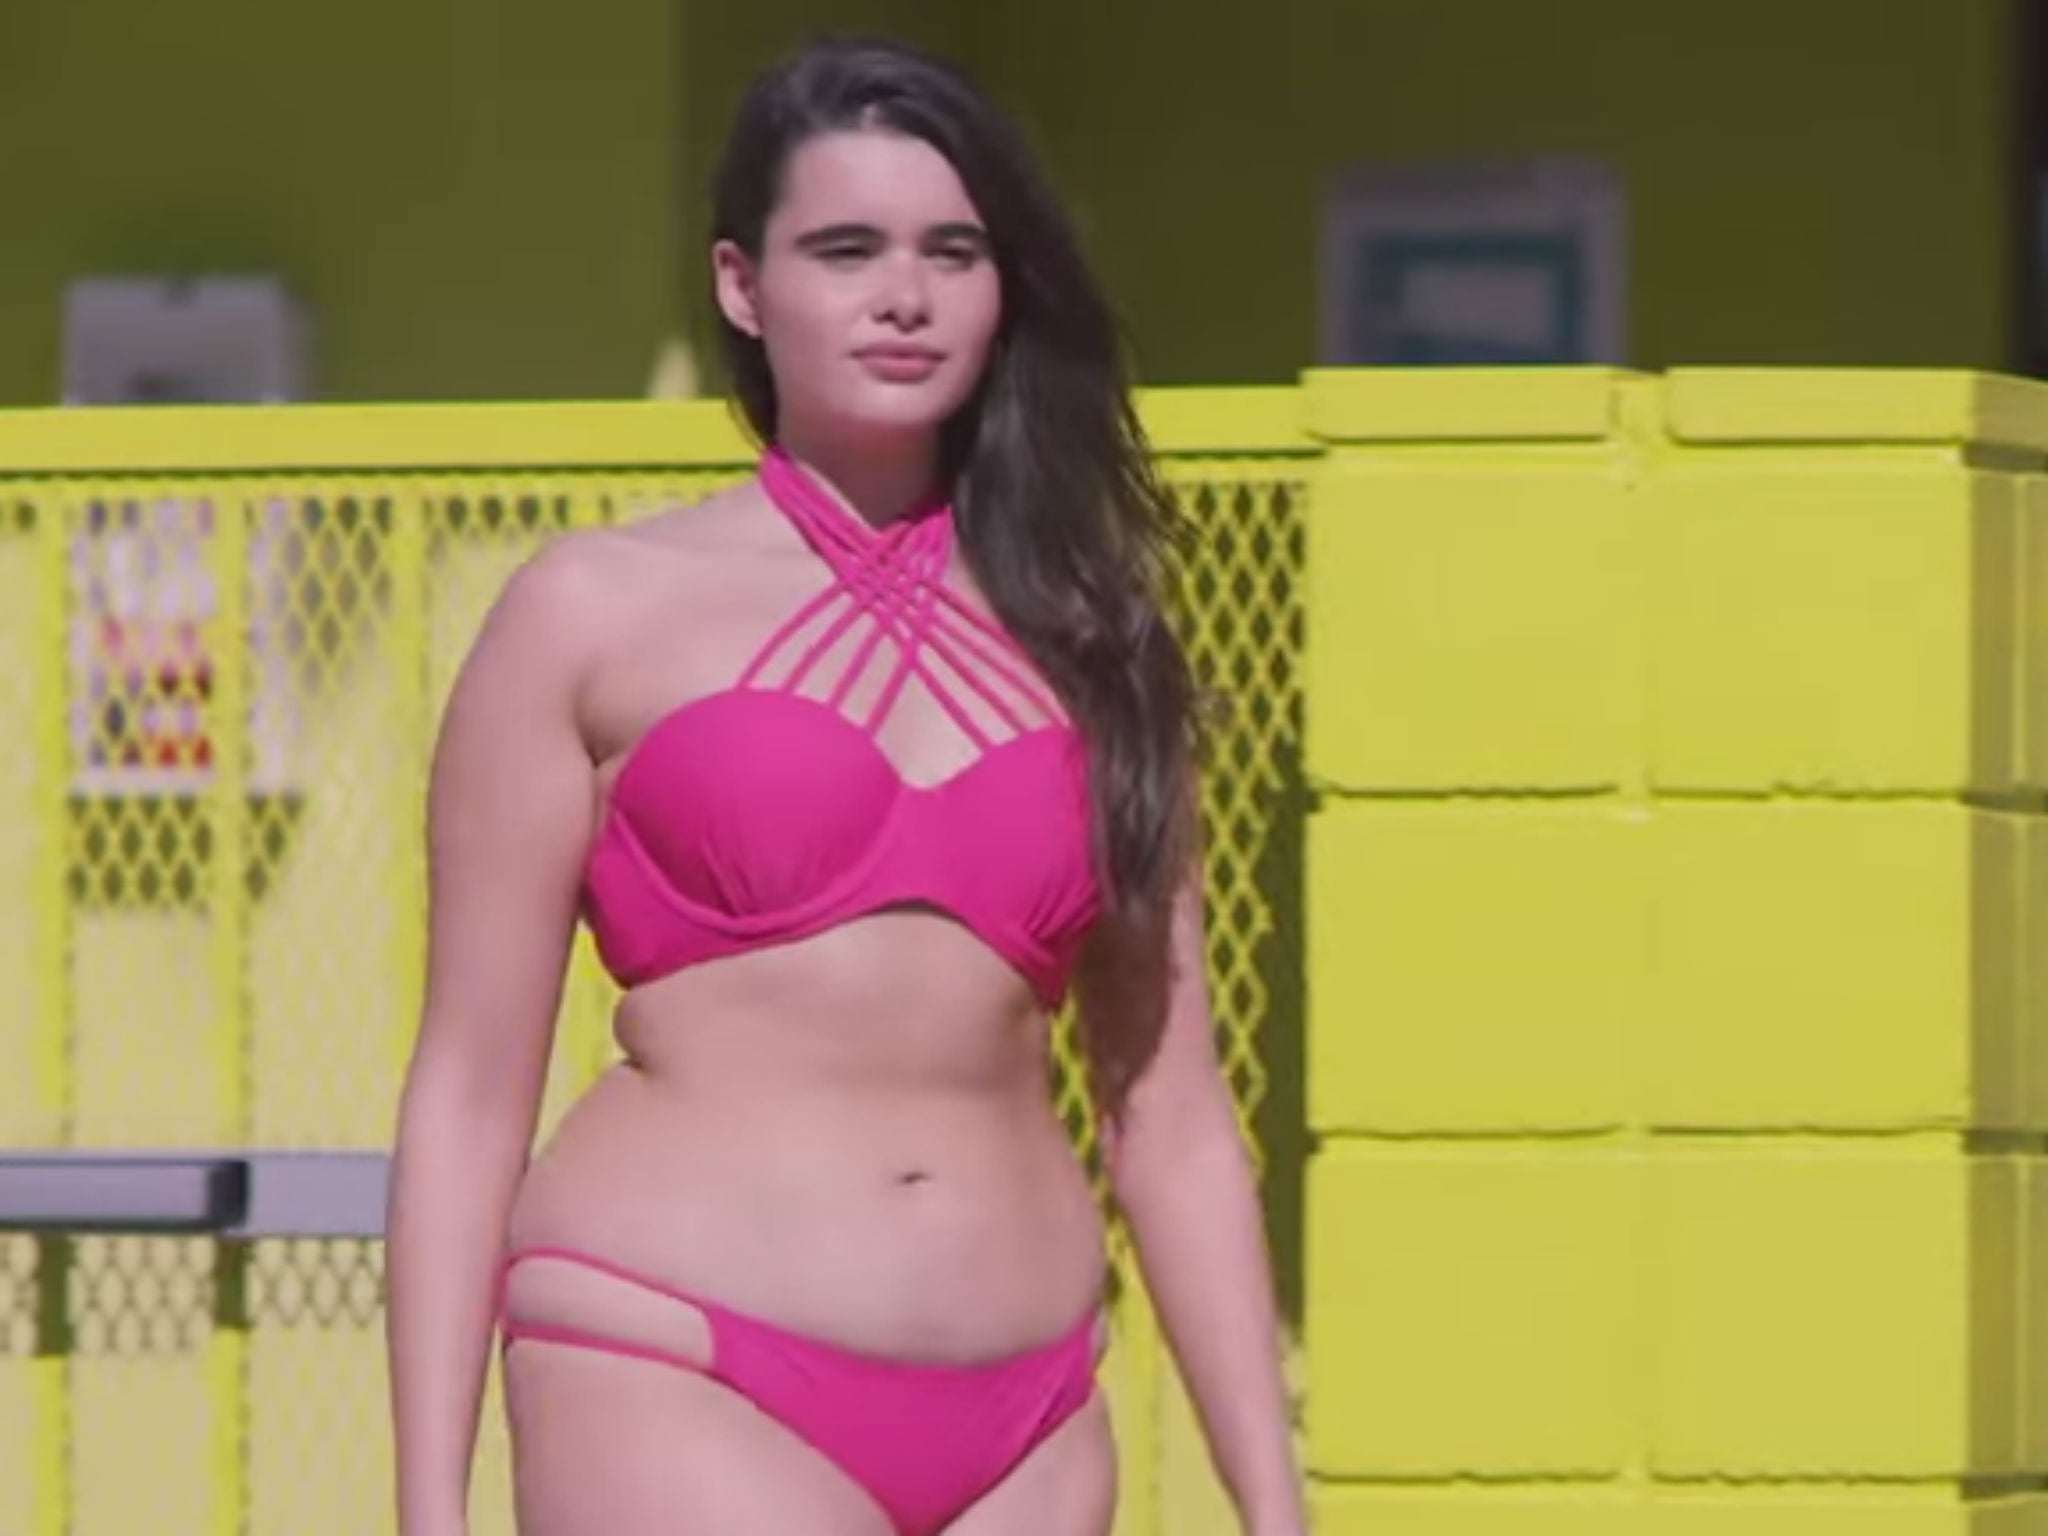 Barbie Ferreira in her American Eagles Outfitters campaign